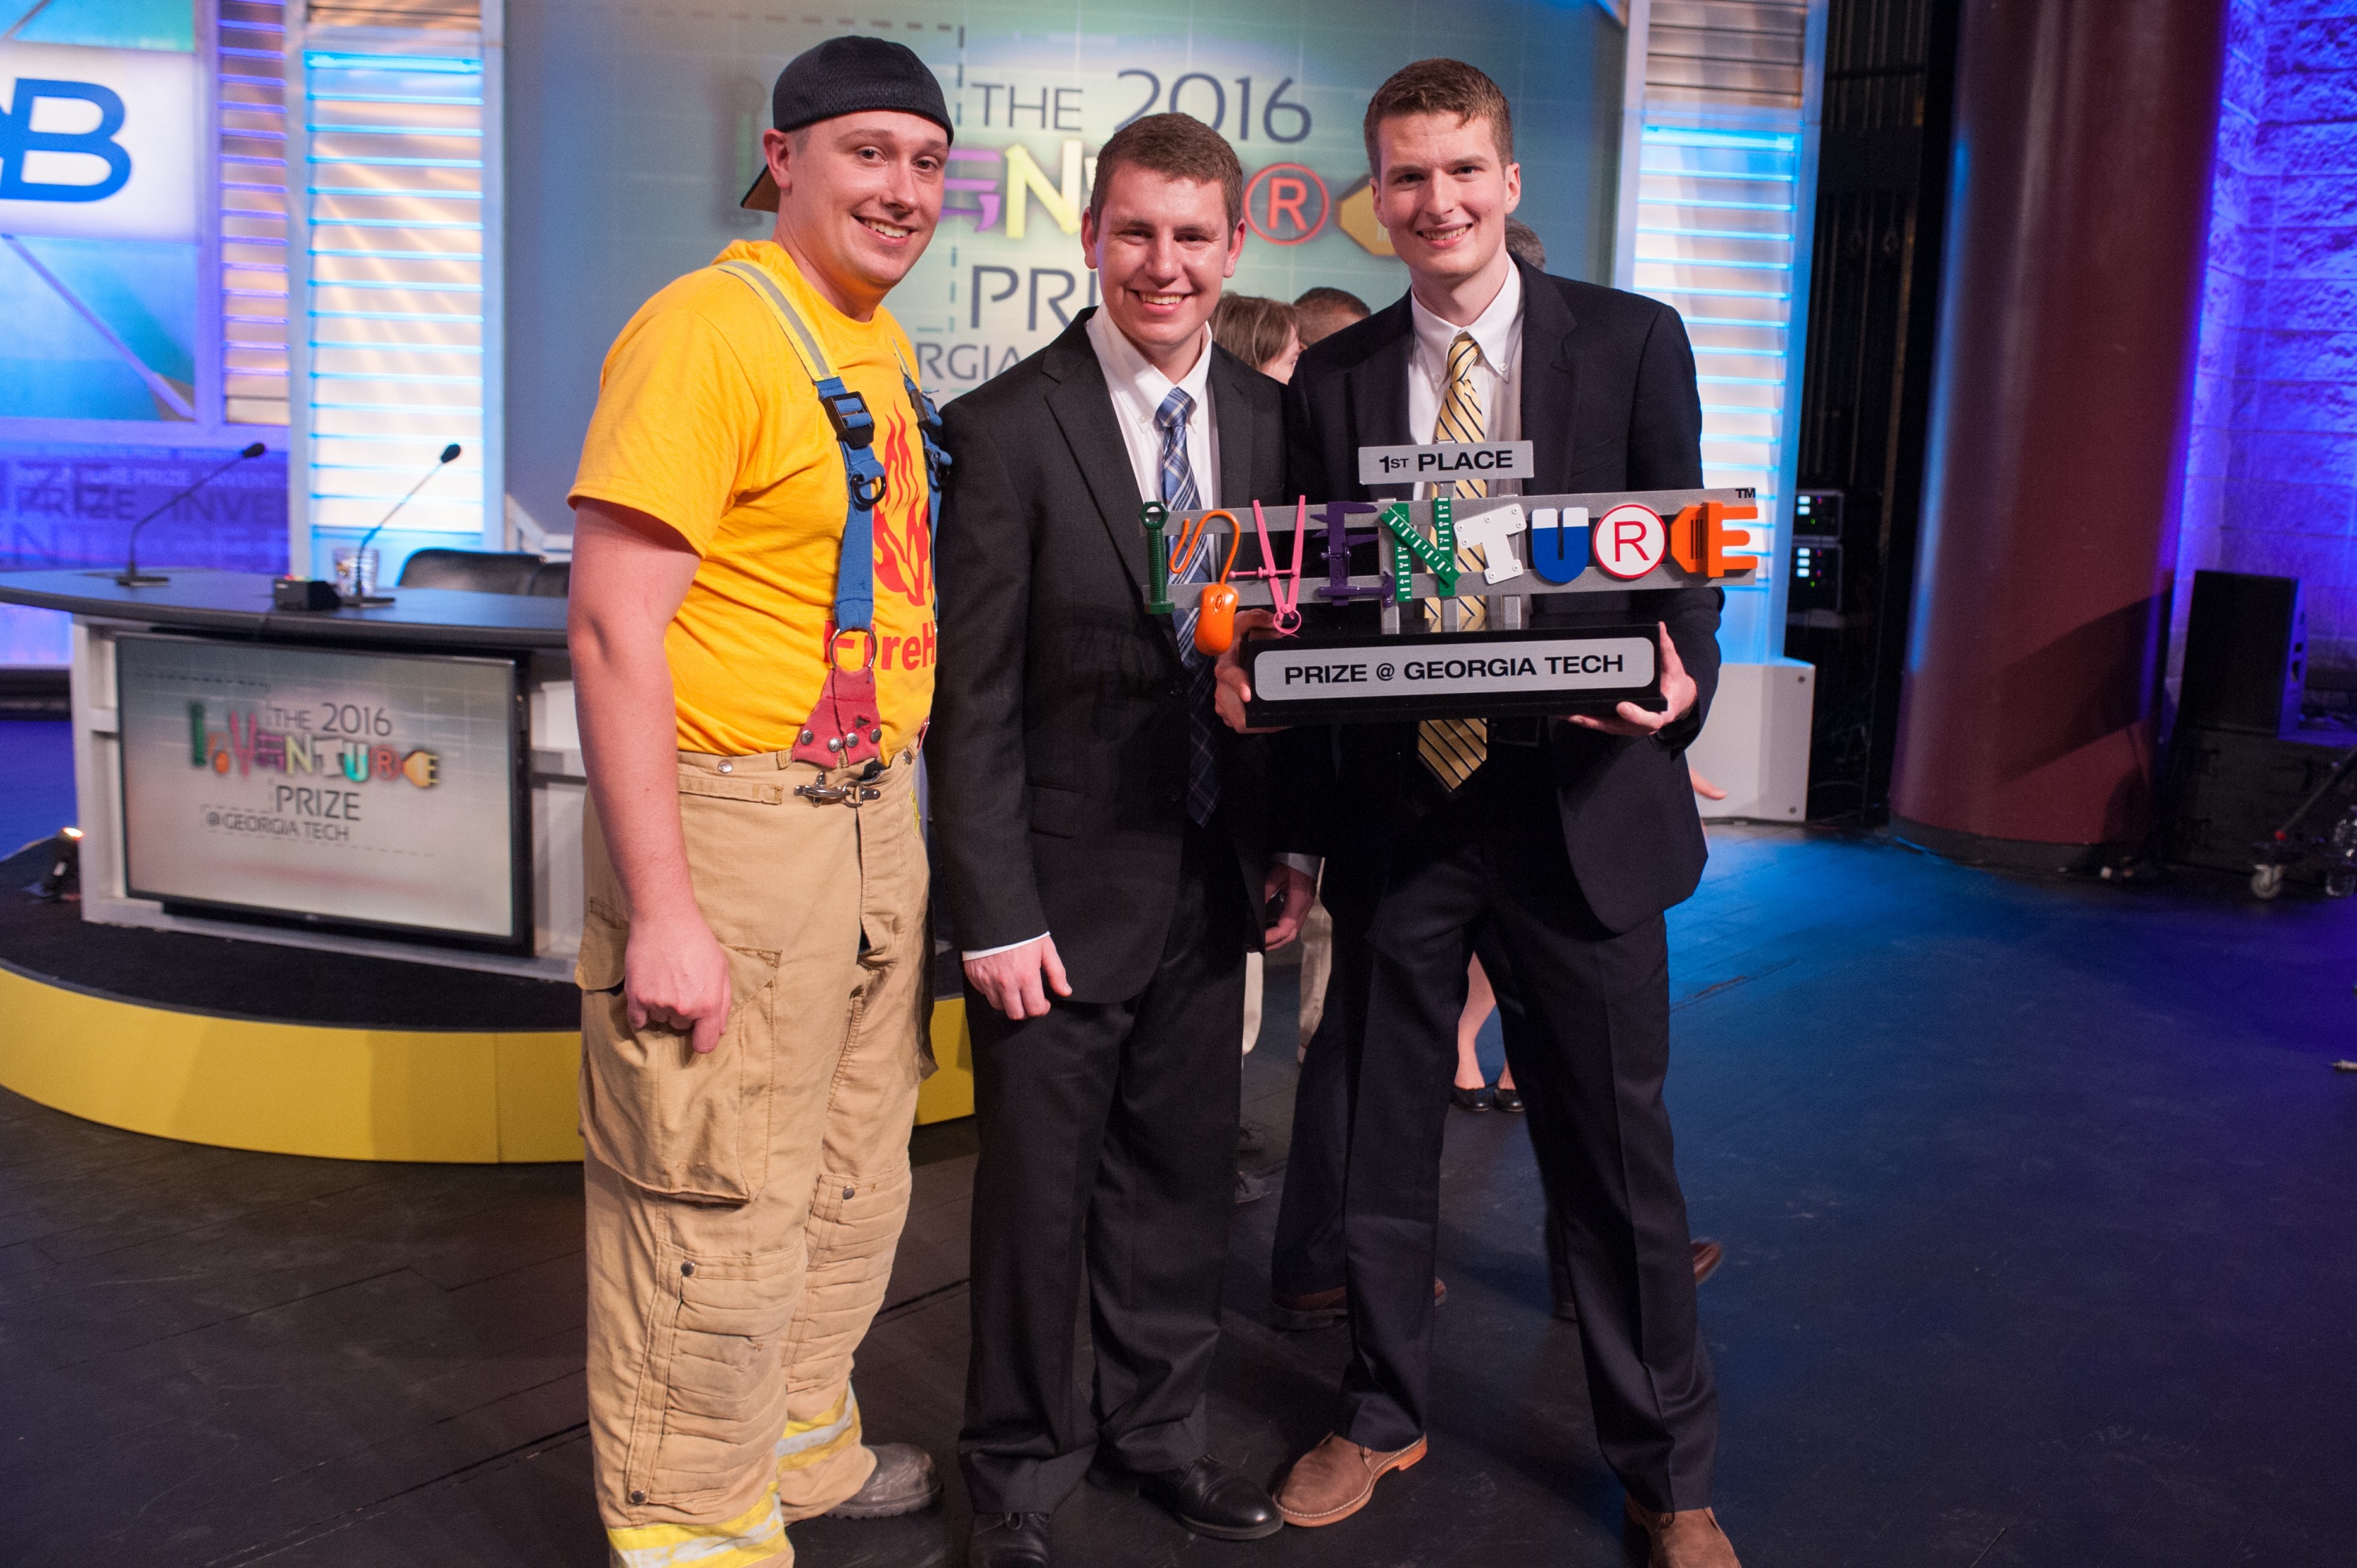 FireHUD, a device that helps firefighters track their vital signs while fighting fires, won the 2016 InVenture Prize at Georgia Tech.  The inventors – Zachary Braun, a computer engineering major, and Tyler Sisk, an electrical engineering major – will now represent Georgia Tech at the inaugural ACC InVenture Prize. The students are pictured with a firefighter who has used the device. Photo by Fitrah Hamid